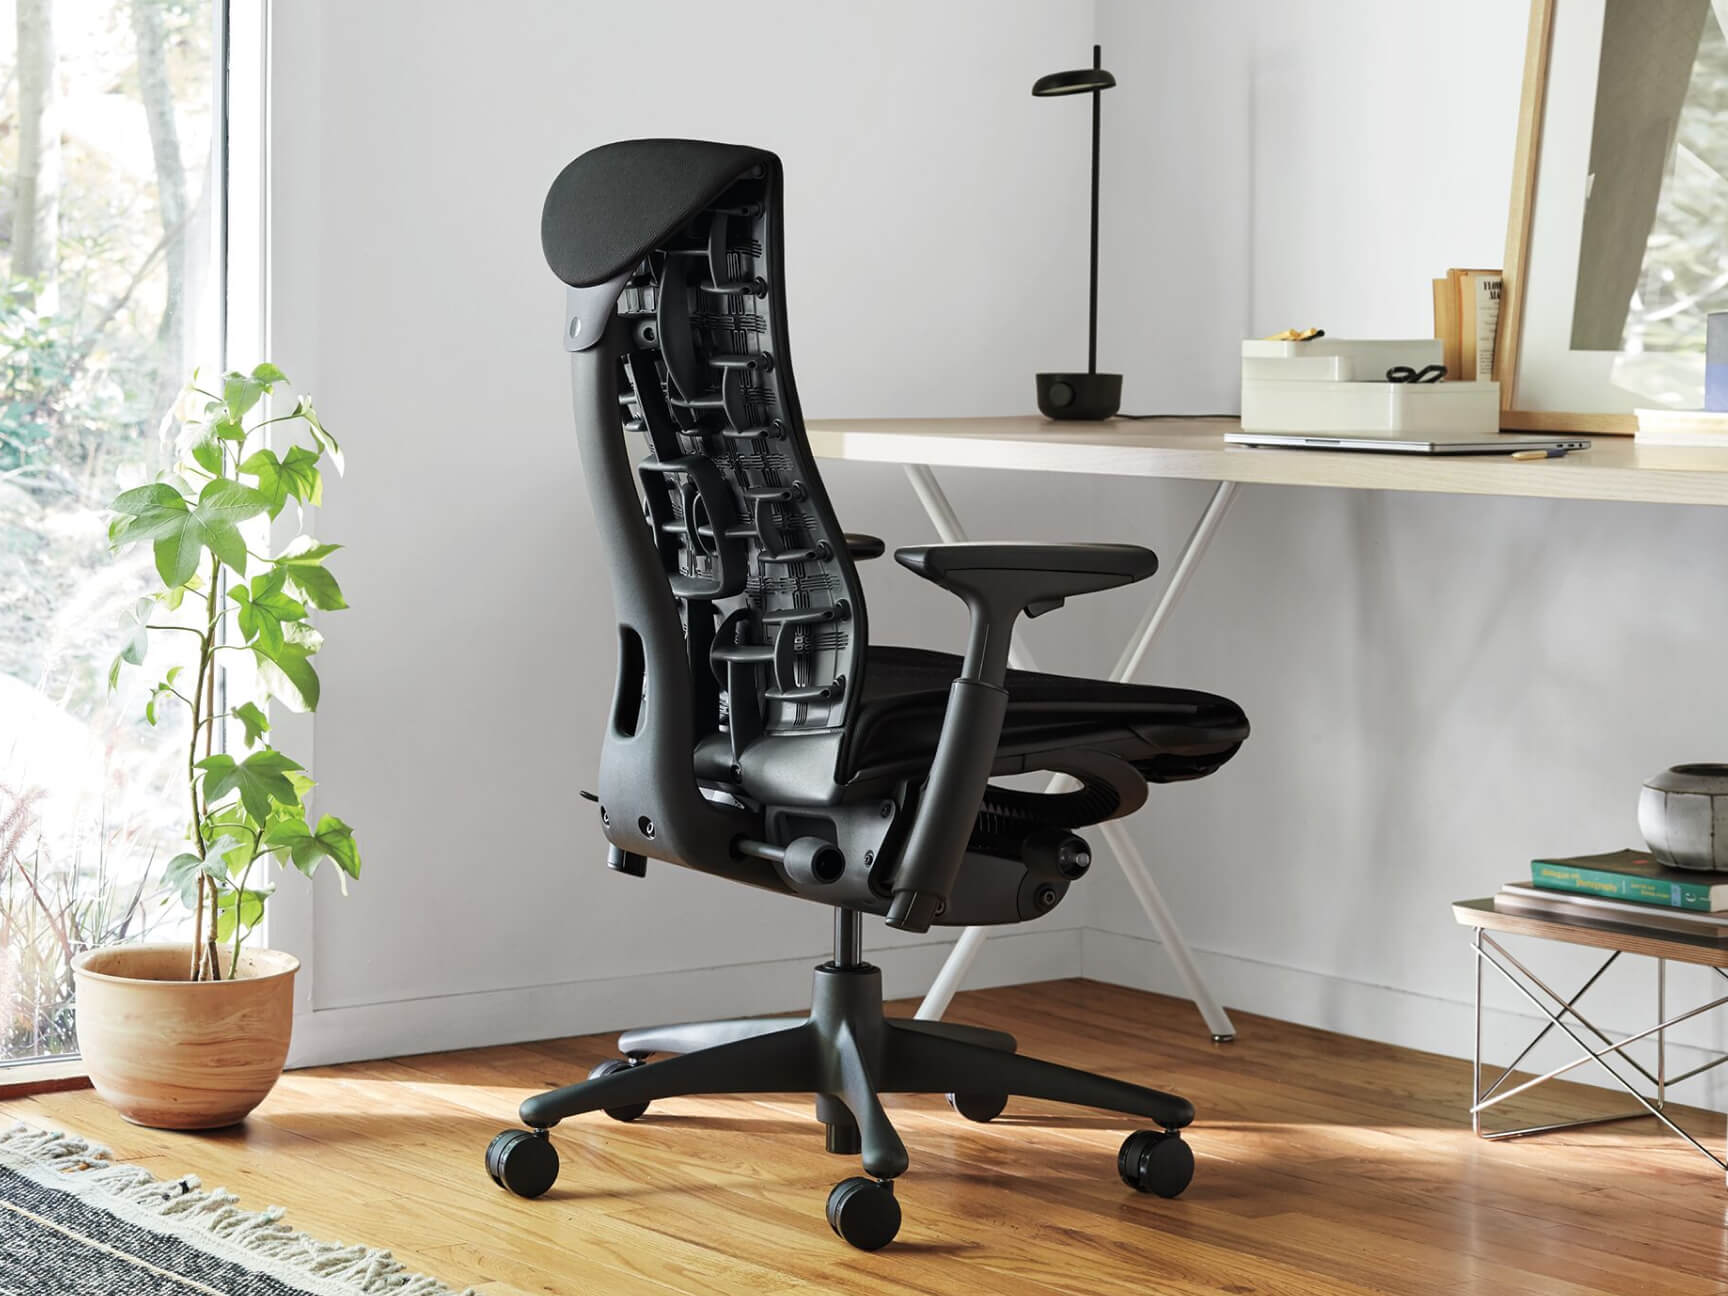 Simple Padded Gray Office Chair - Lider Plus